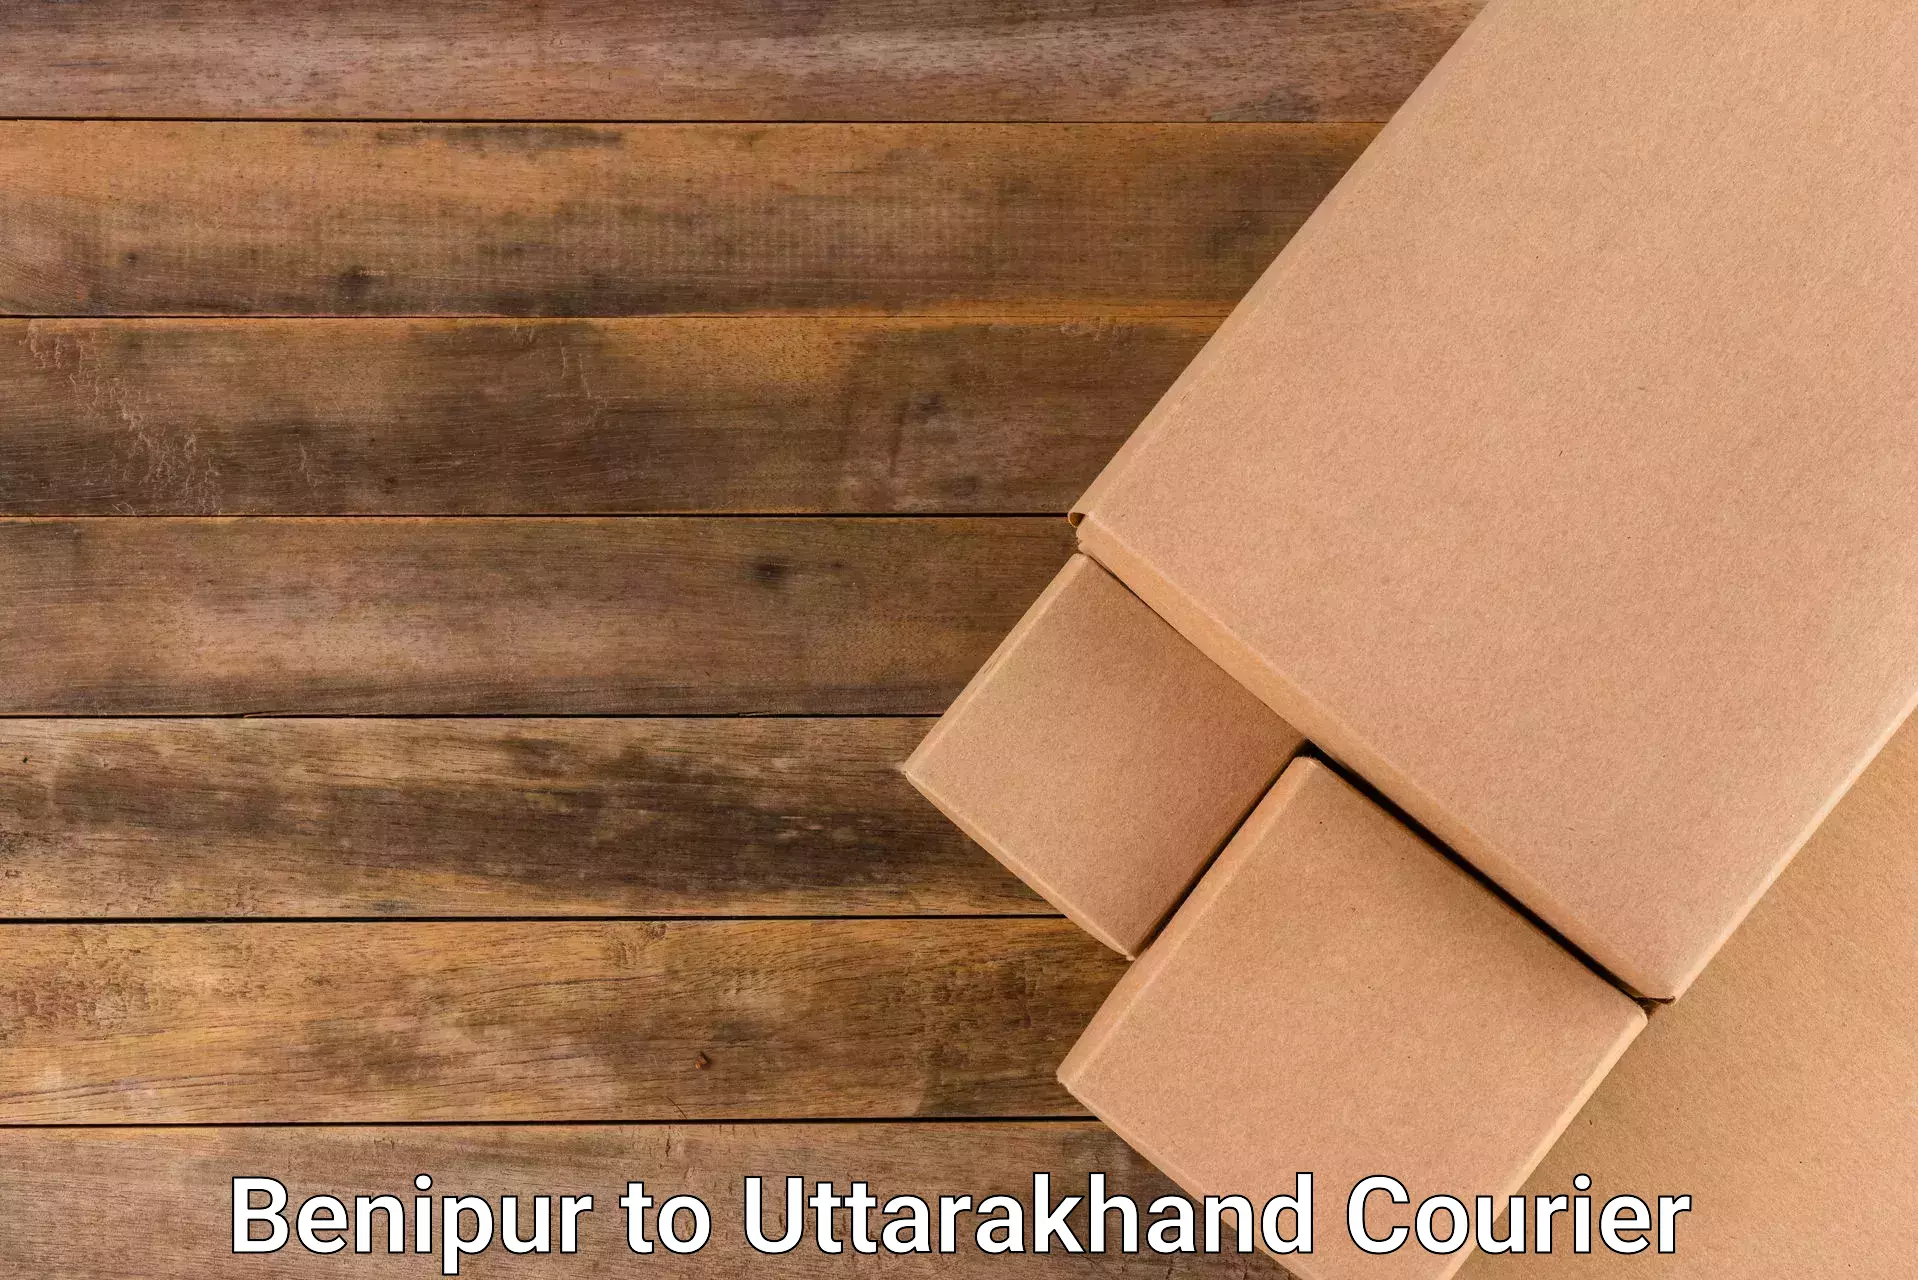 Global shipping networks Benipur to Rudrapur